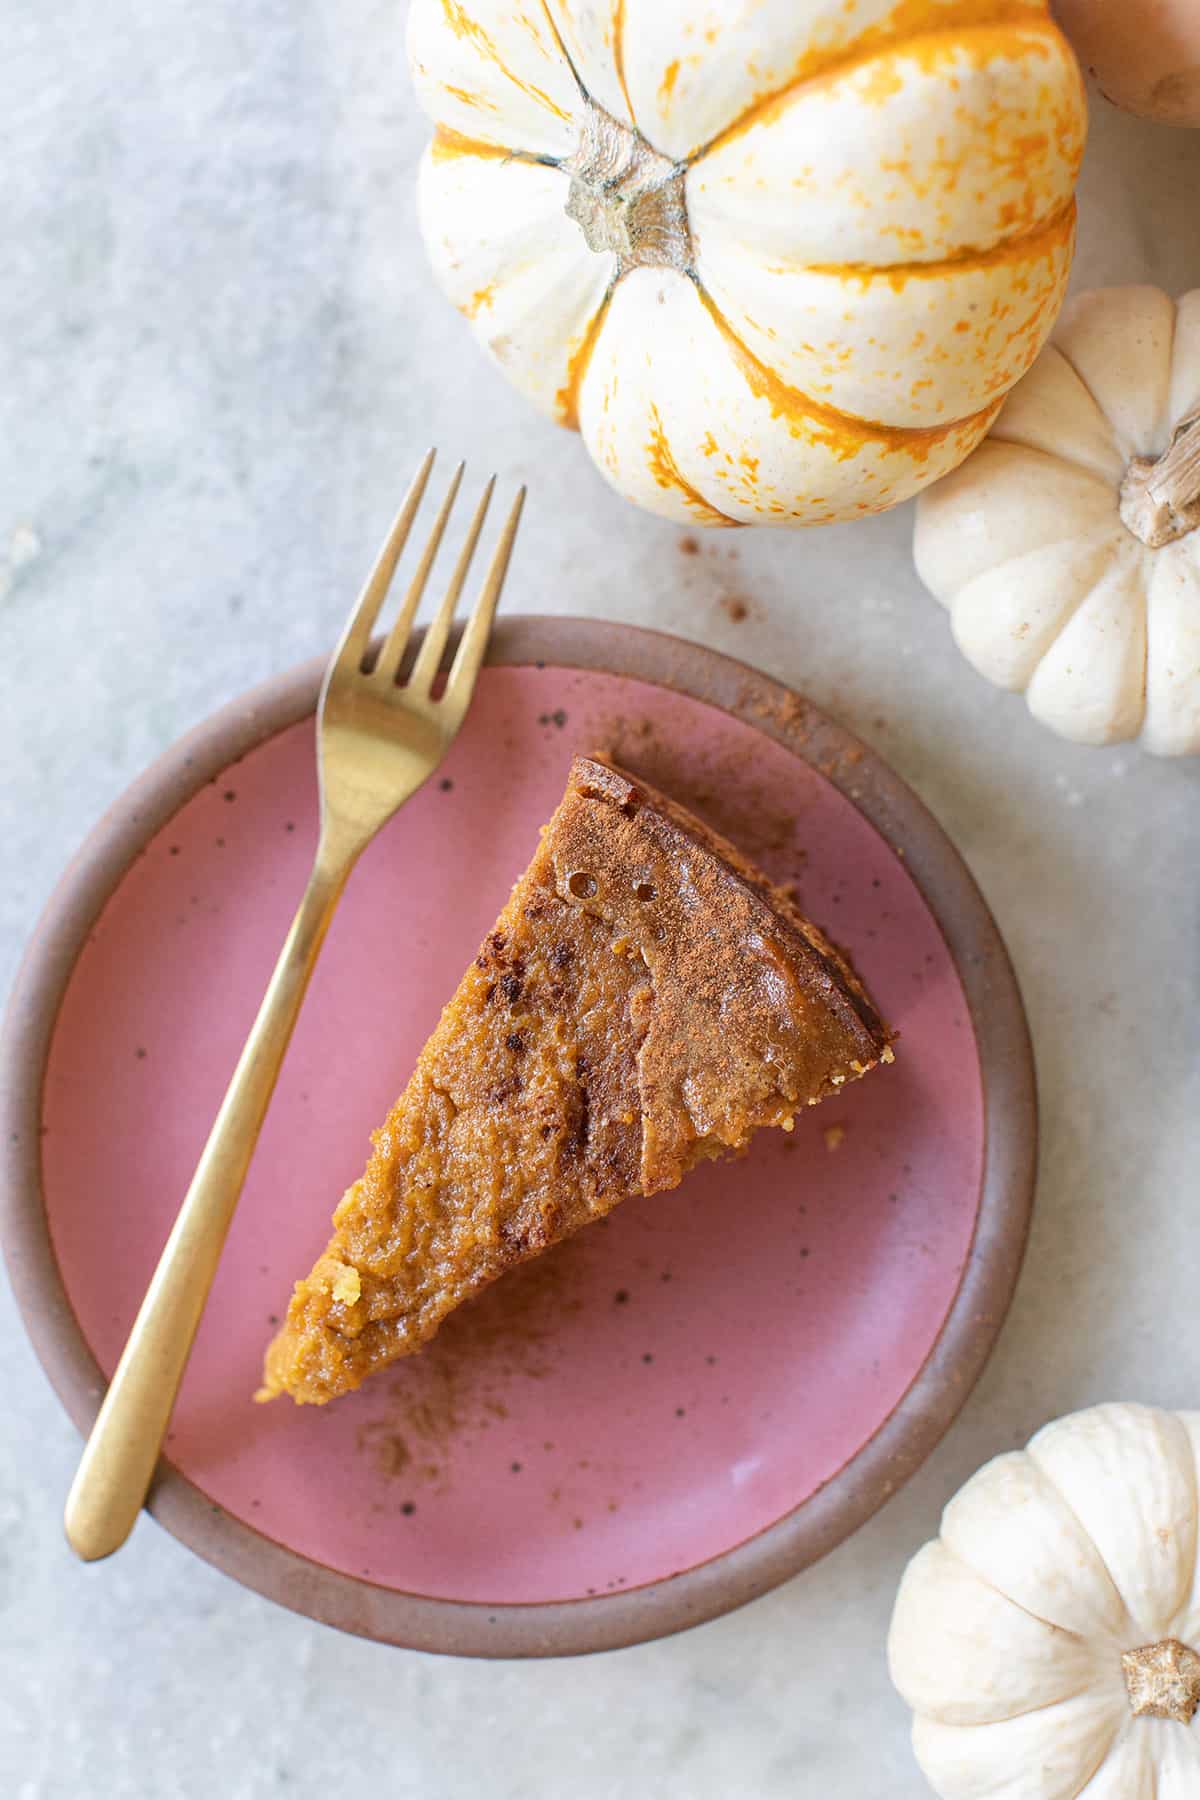 Slice of a pumpkin cake on a pink plate.